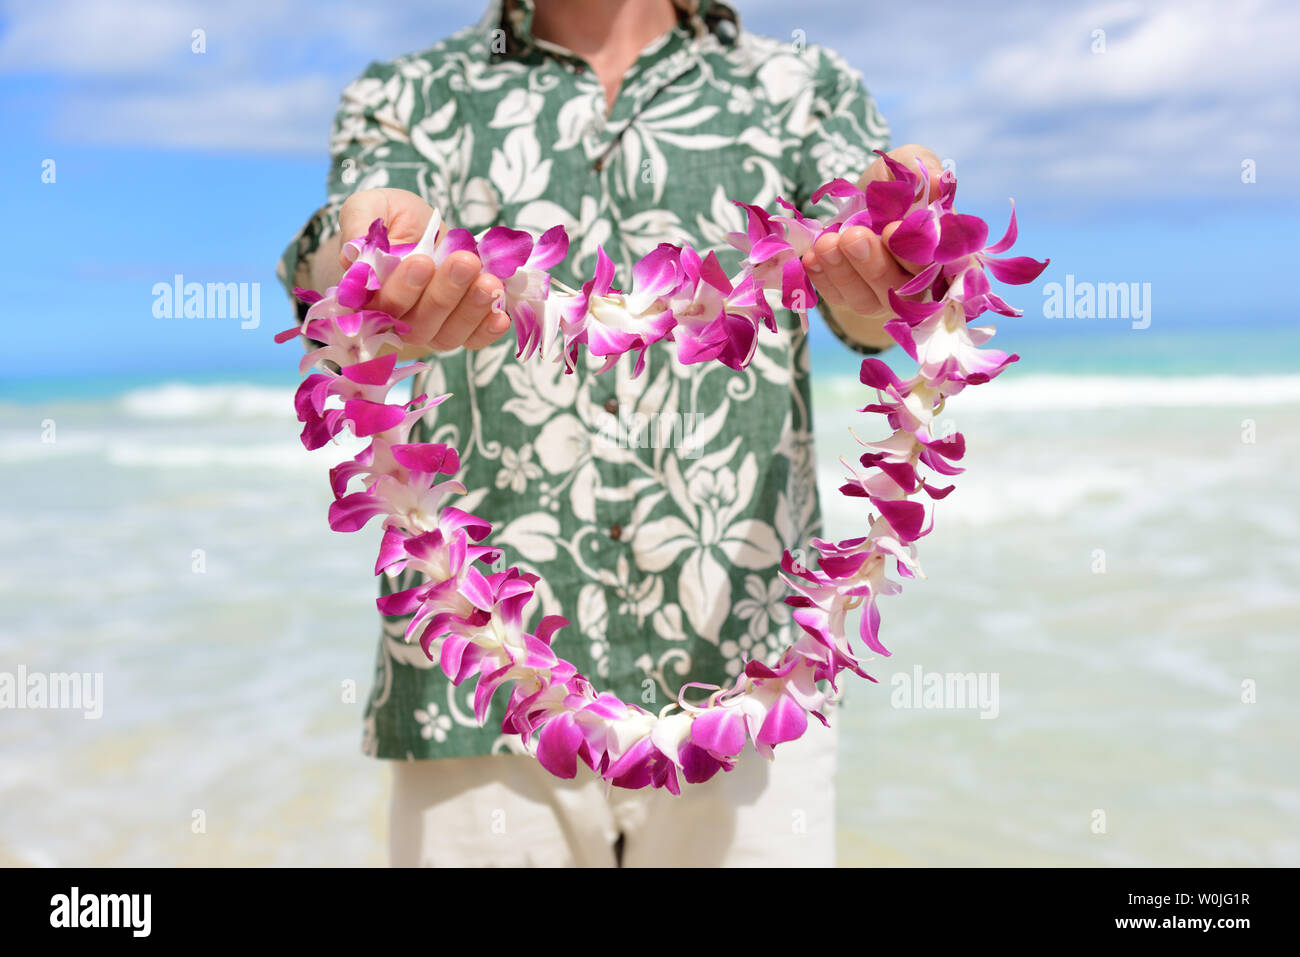 Hawaii tradition - giving a Hawaiian flowers lei. Portrait of a male person holding a garland of flowers as the Hawaiian culture welcoming gesture for tourists travelling to the Pacific islands. Stock Photo